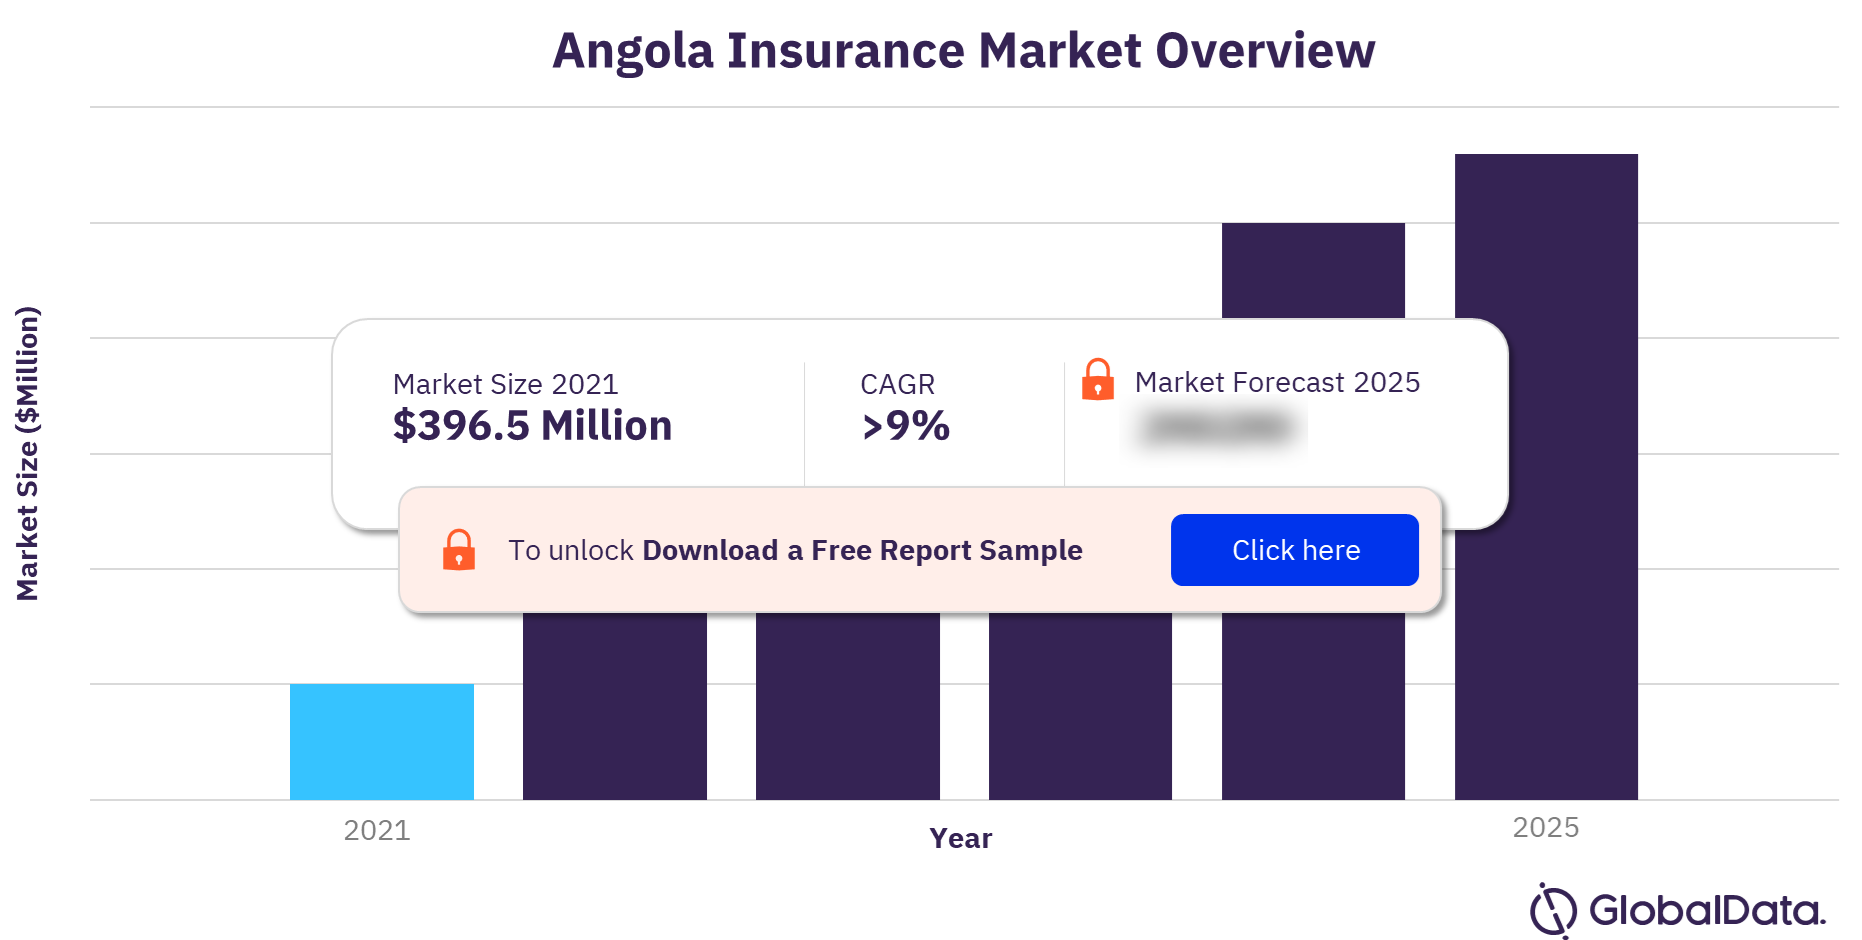 Angola Insurance Market Overview